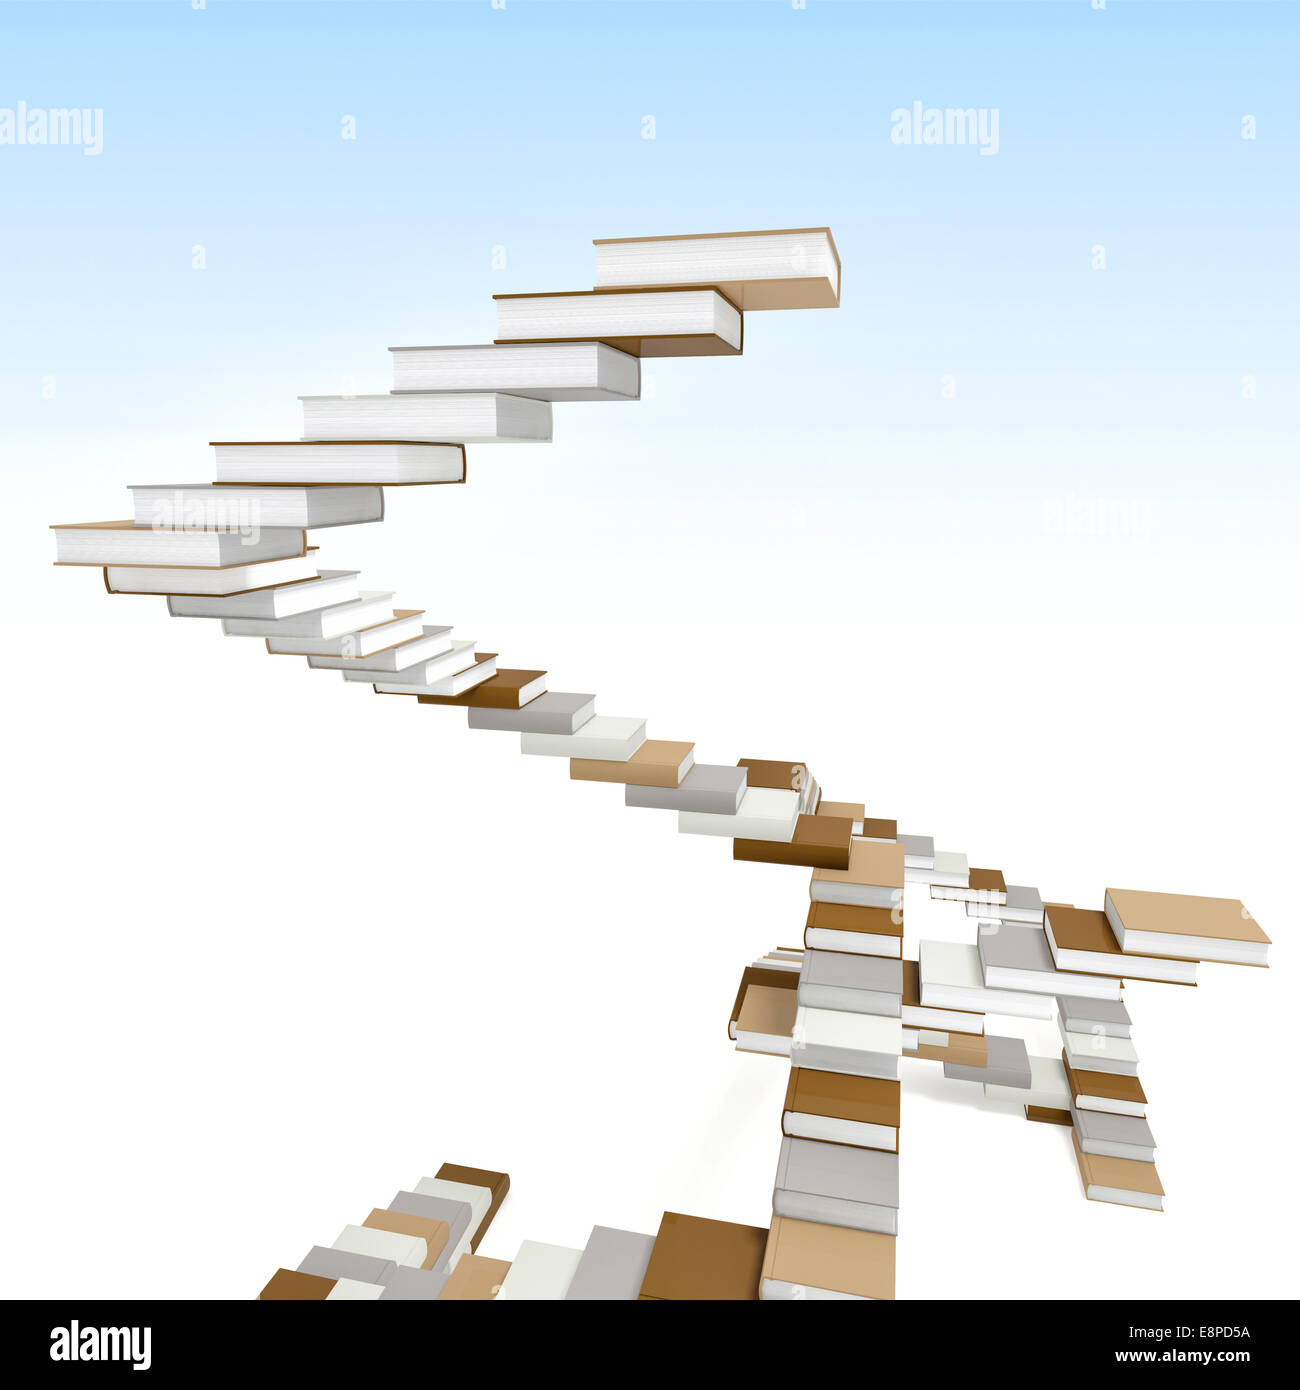 Image 3D d'abstract book stair Banque D'Images